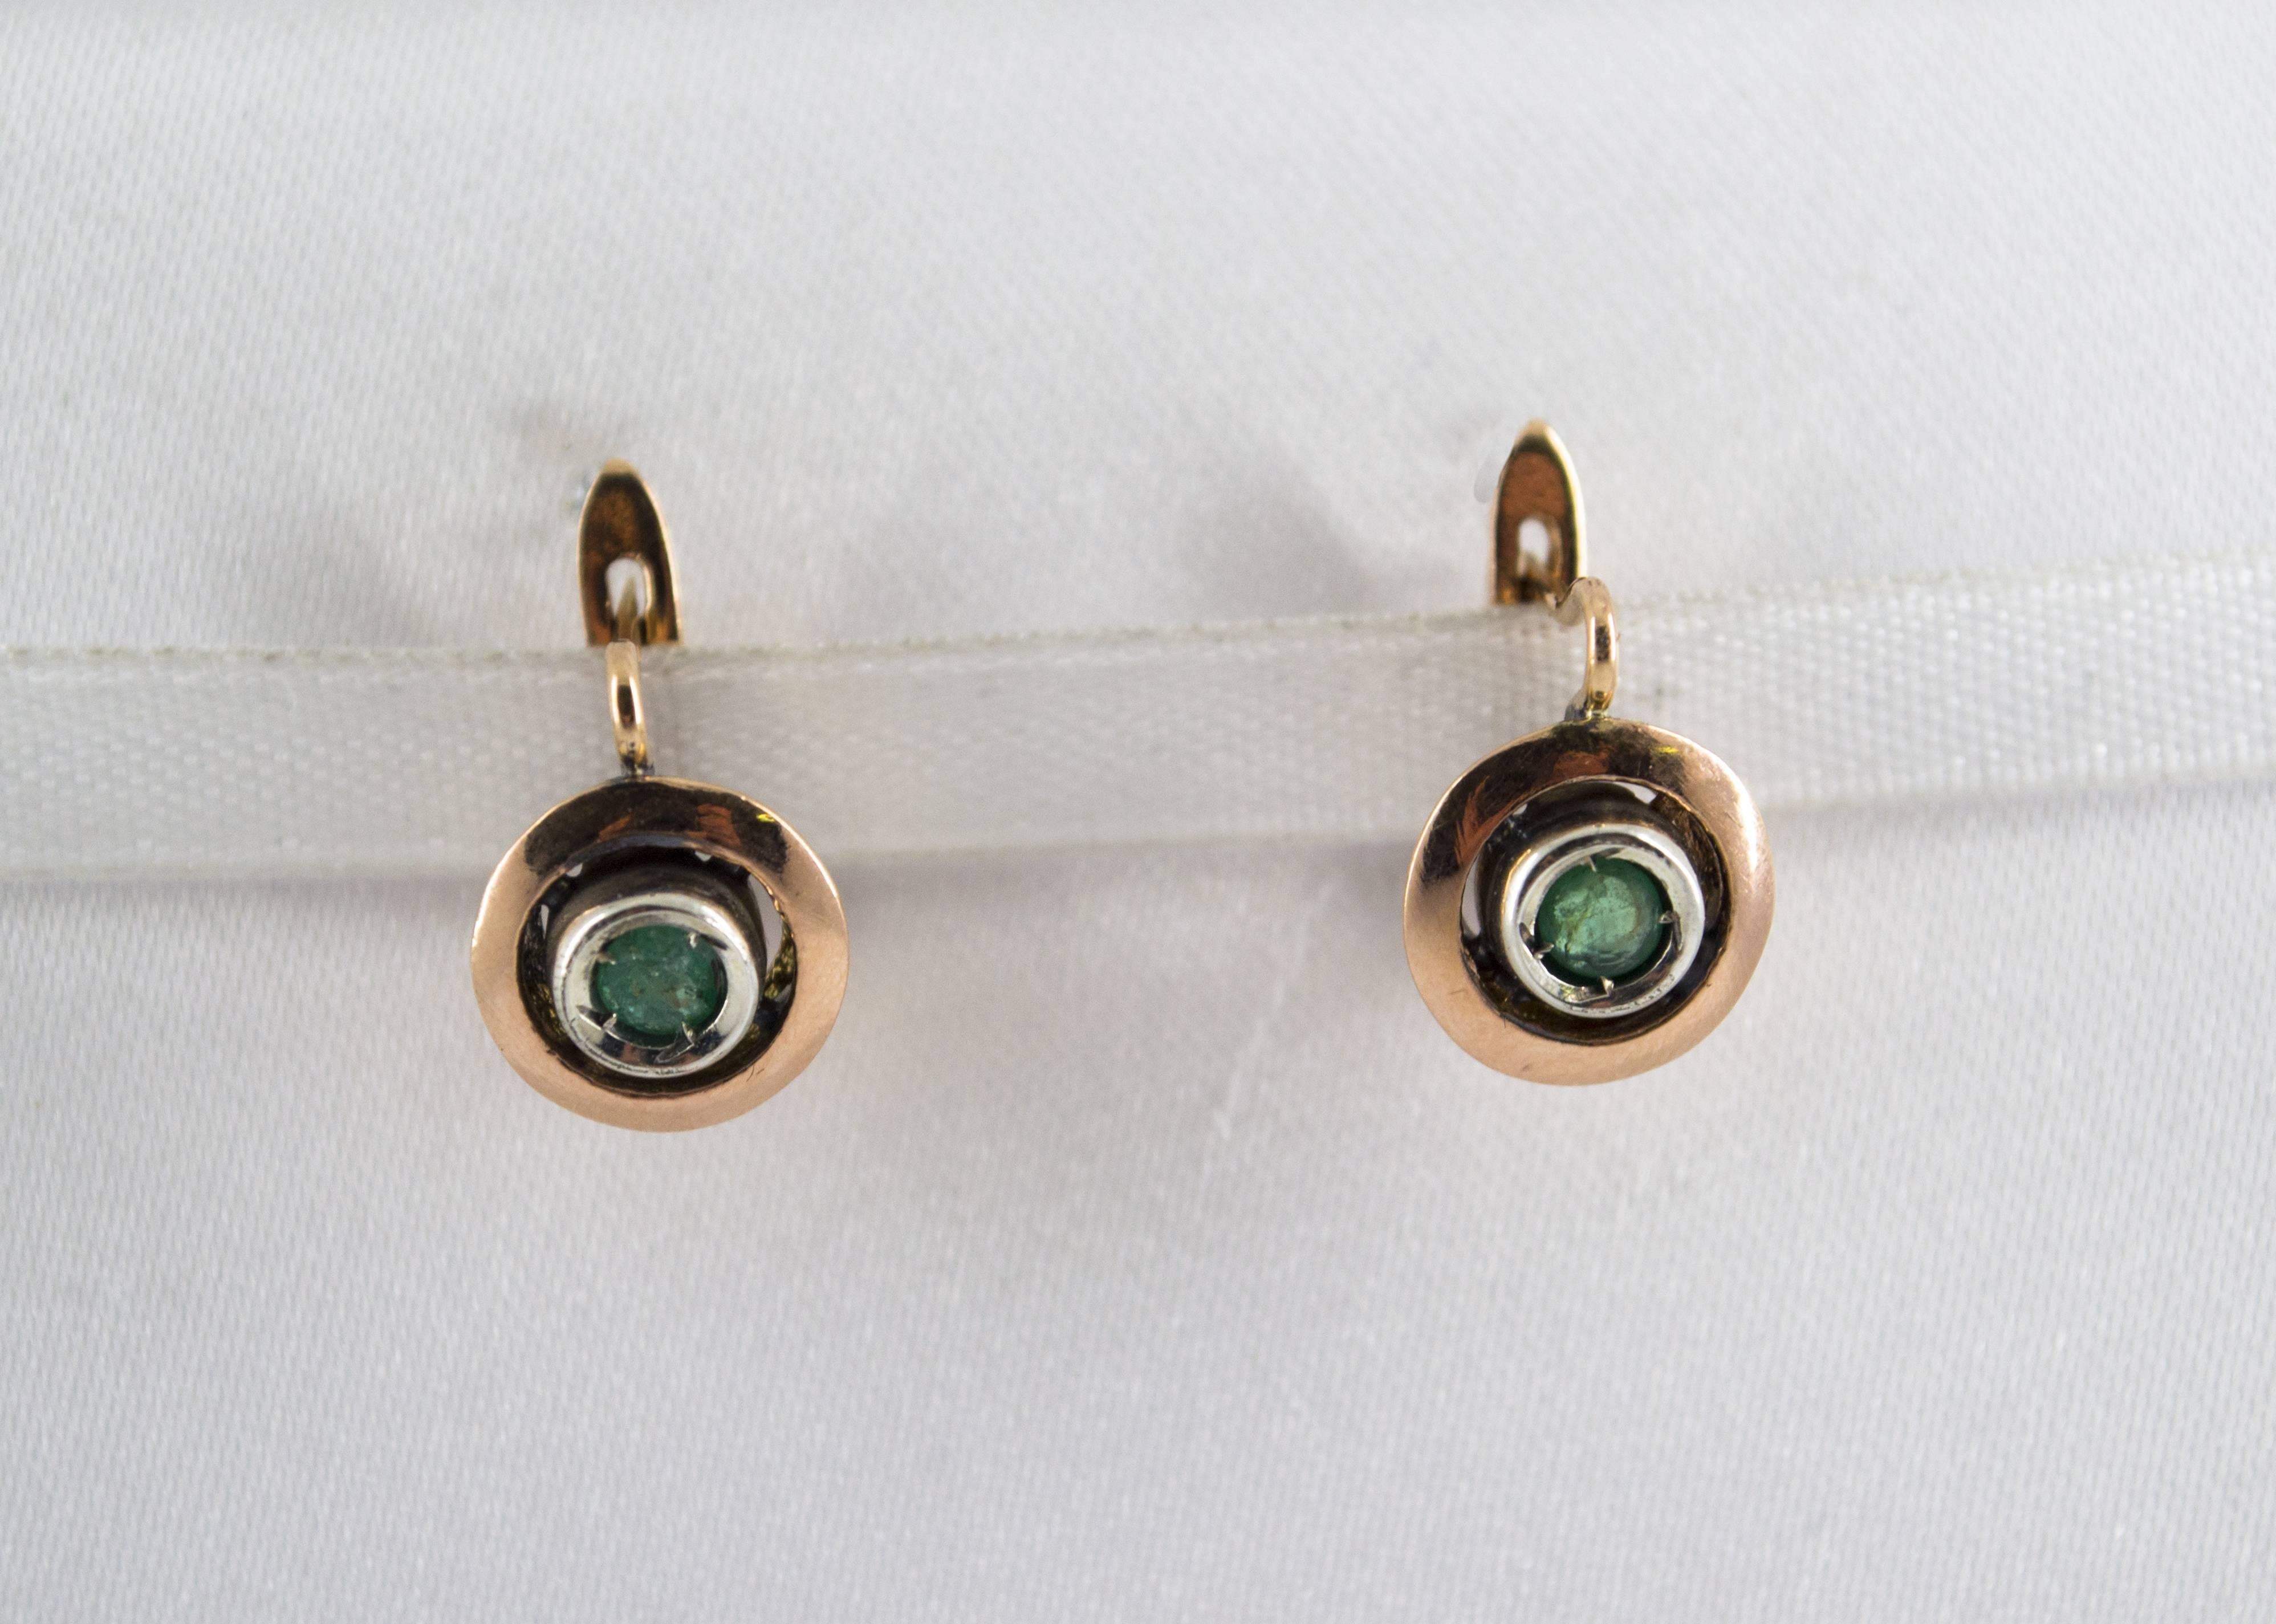 These Earrings are made of 9K White Gold and Sterling Silver.
These Earrings have 0.20 Carats of Emeralds.
These Earrings are available also with Rubies, Blue Sapphires or White Rose Cut Diamonds.

All our Earrings have pins for pierced ears but we